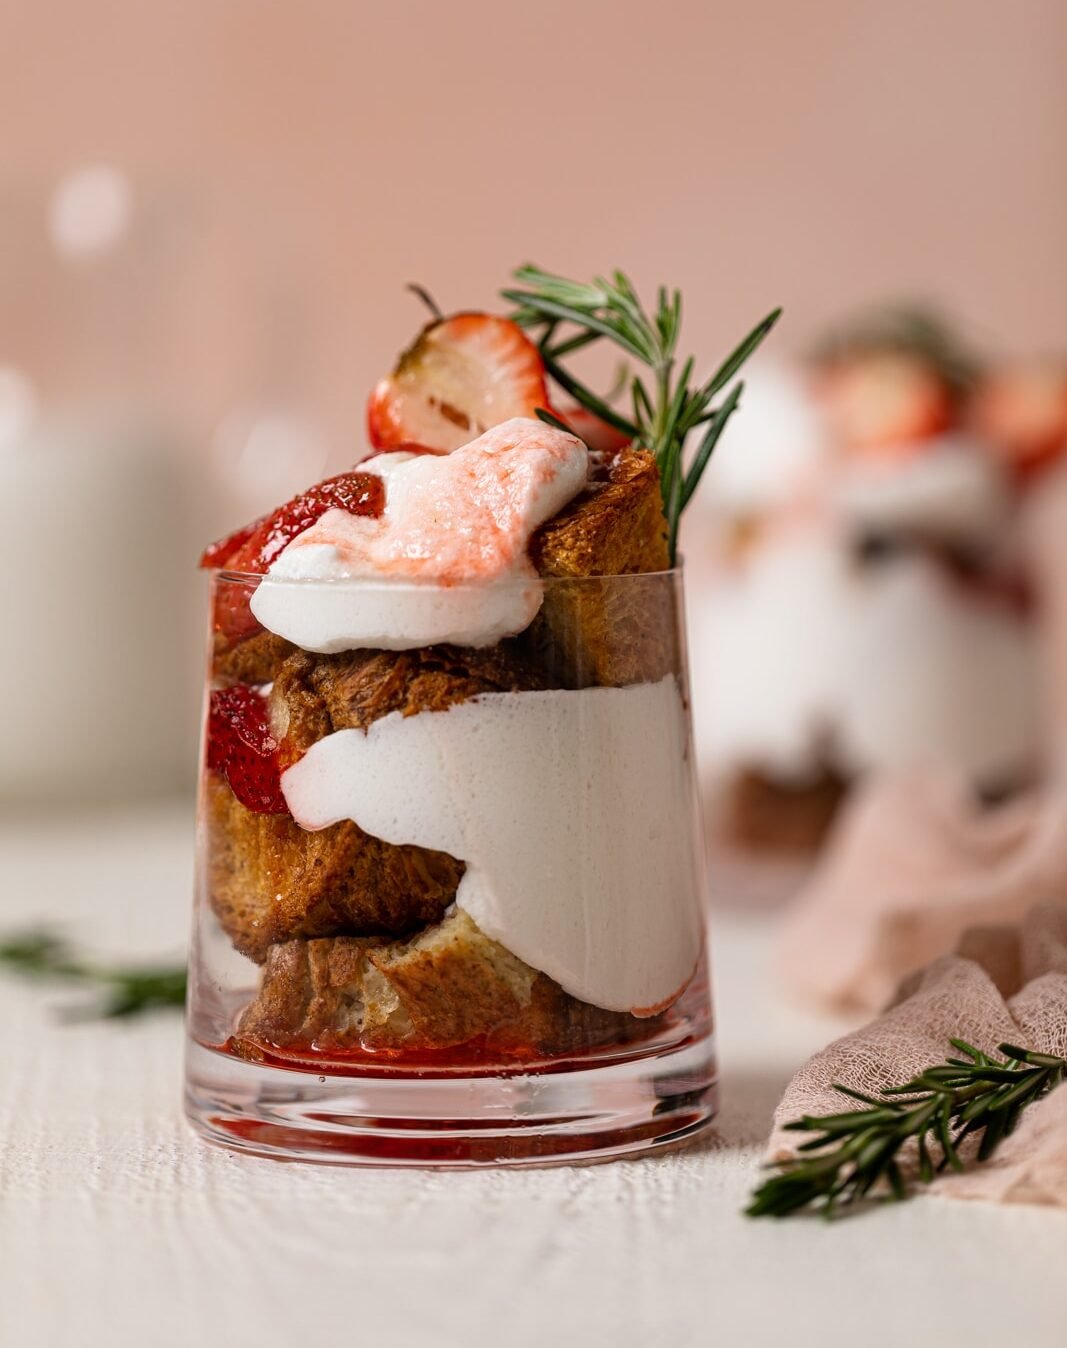 Glass overflowing with a Dairy-Free Strawberry French Toast Trifle